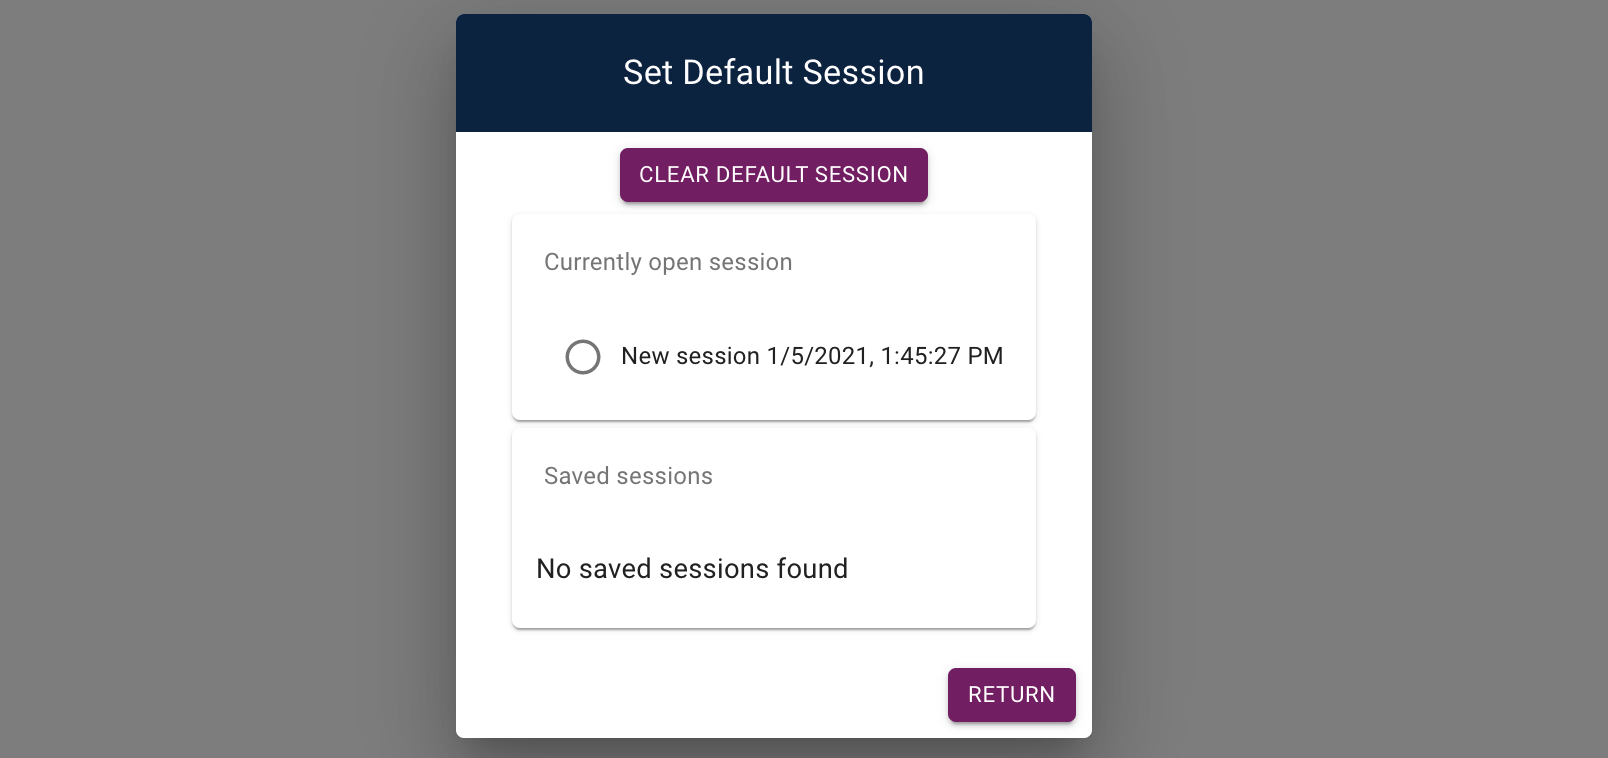 The 'Set default session' will persist your current session into the config file so any subsequent visitors to the app will see this session.